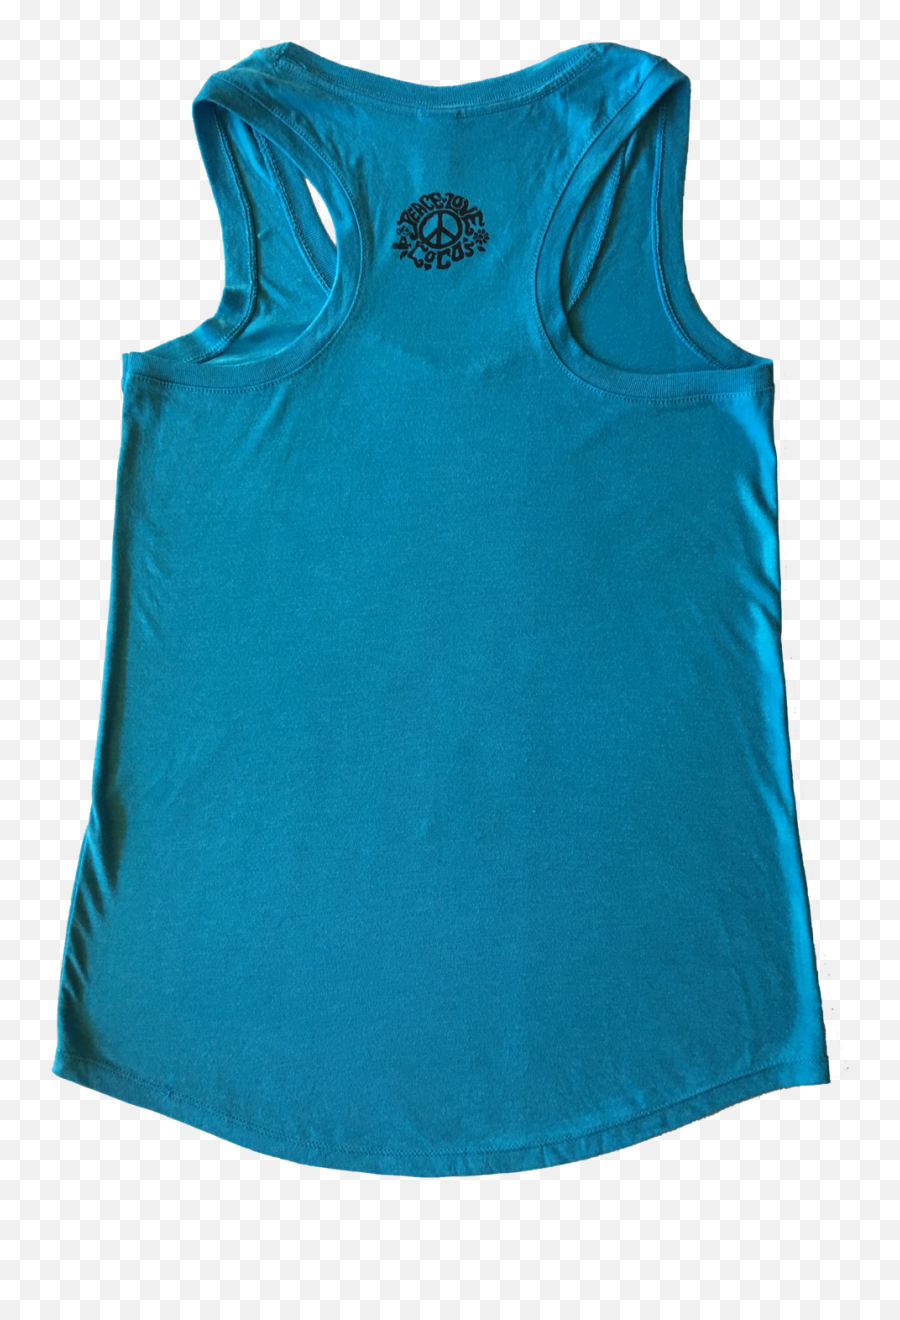 Tank Top Cocos Sunset Grille Png